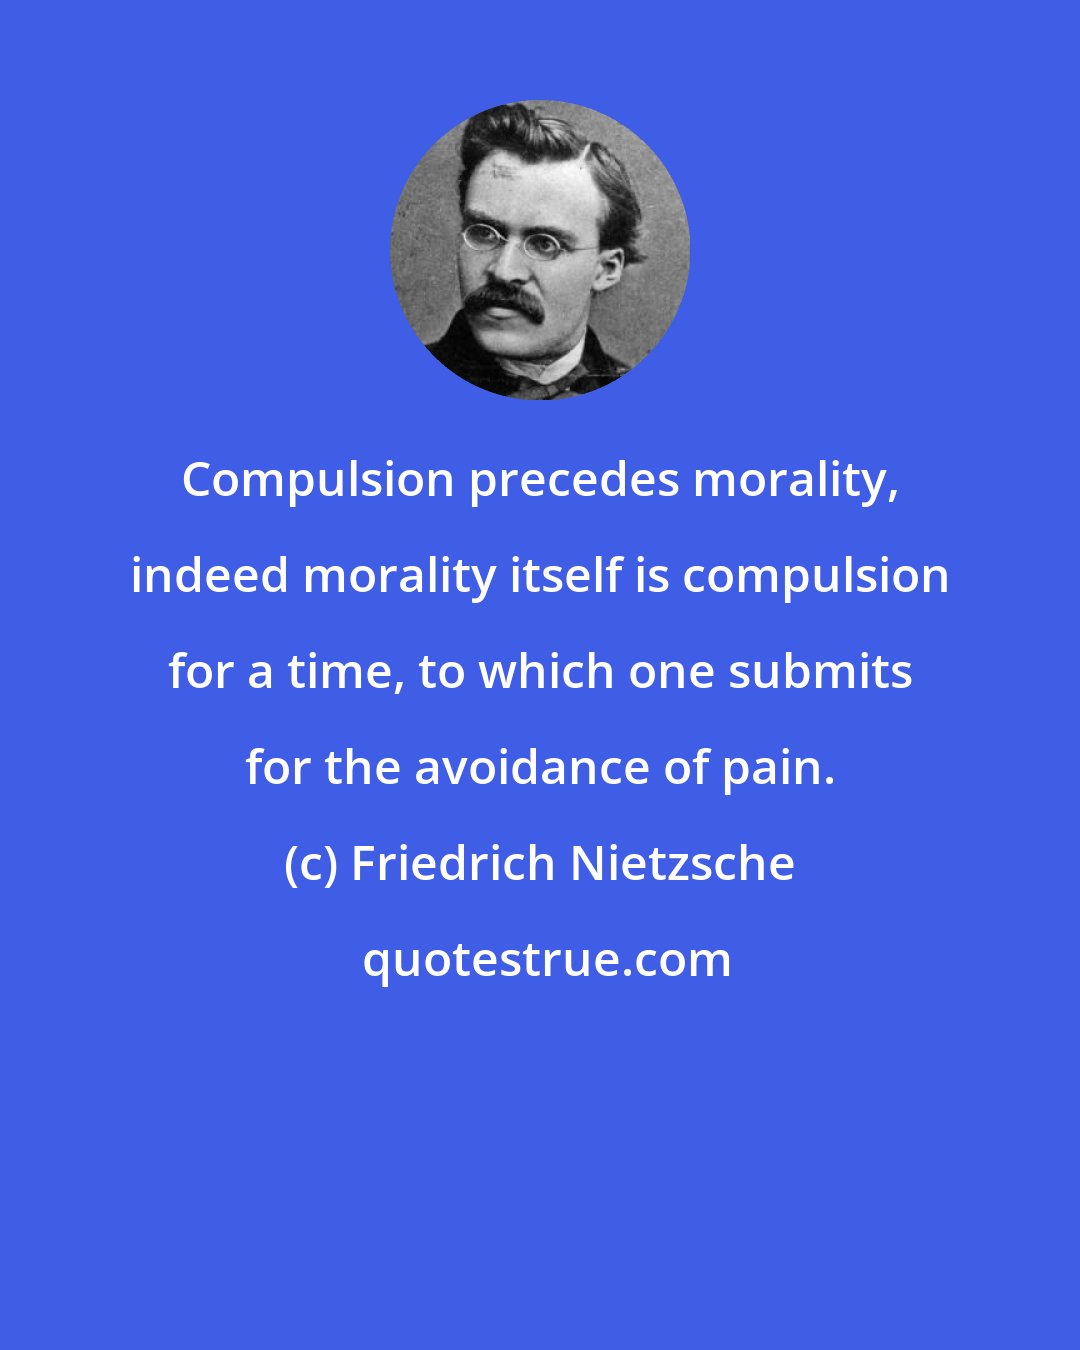 Friedrich Nietzsche: Compulsion precedes morality, indeed morality itself is compulsion for a time, to which one submits for the avoidance of pain.